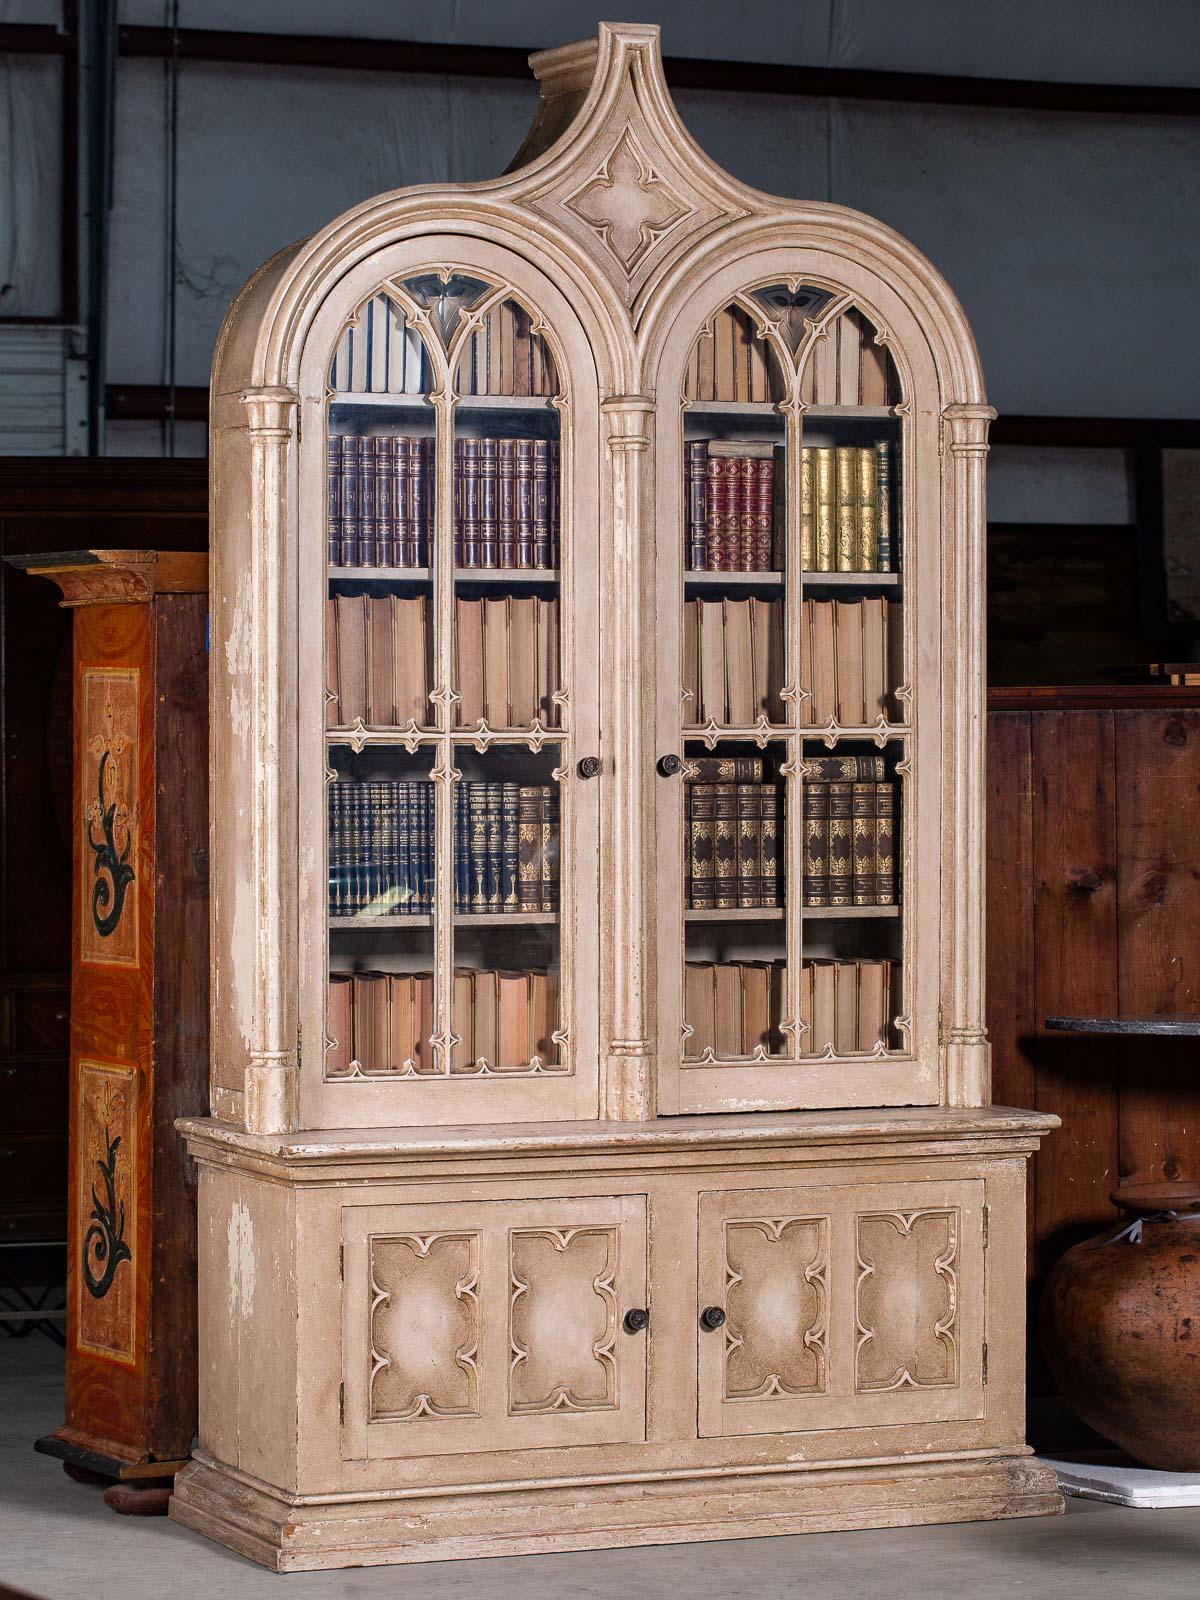 Receive our new selections direct from 1stdibs by email each week. Please click Follow Dealer below and see them first!

A stunning Gothic Revival cabinet with the original painted finish and glass from England, circa 1840. This is a superb and